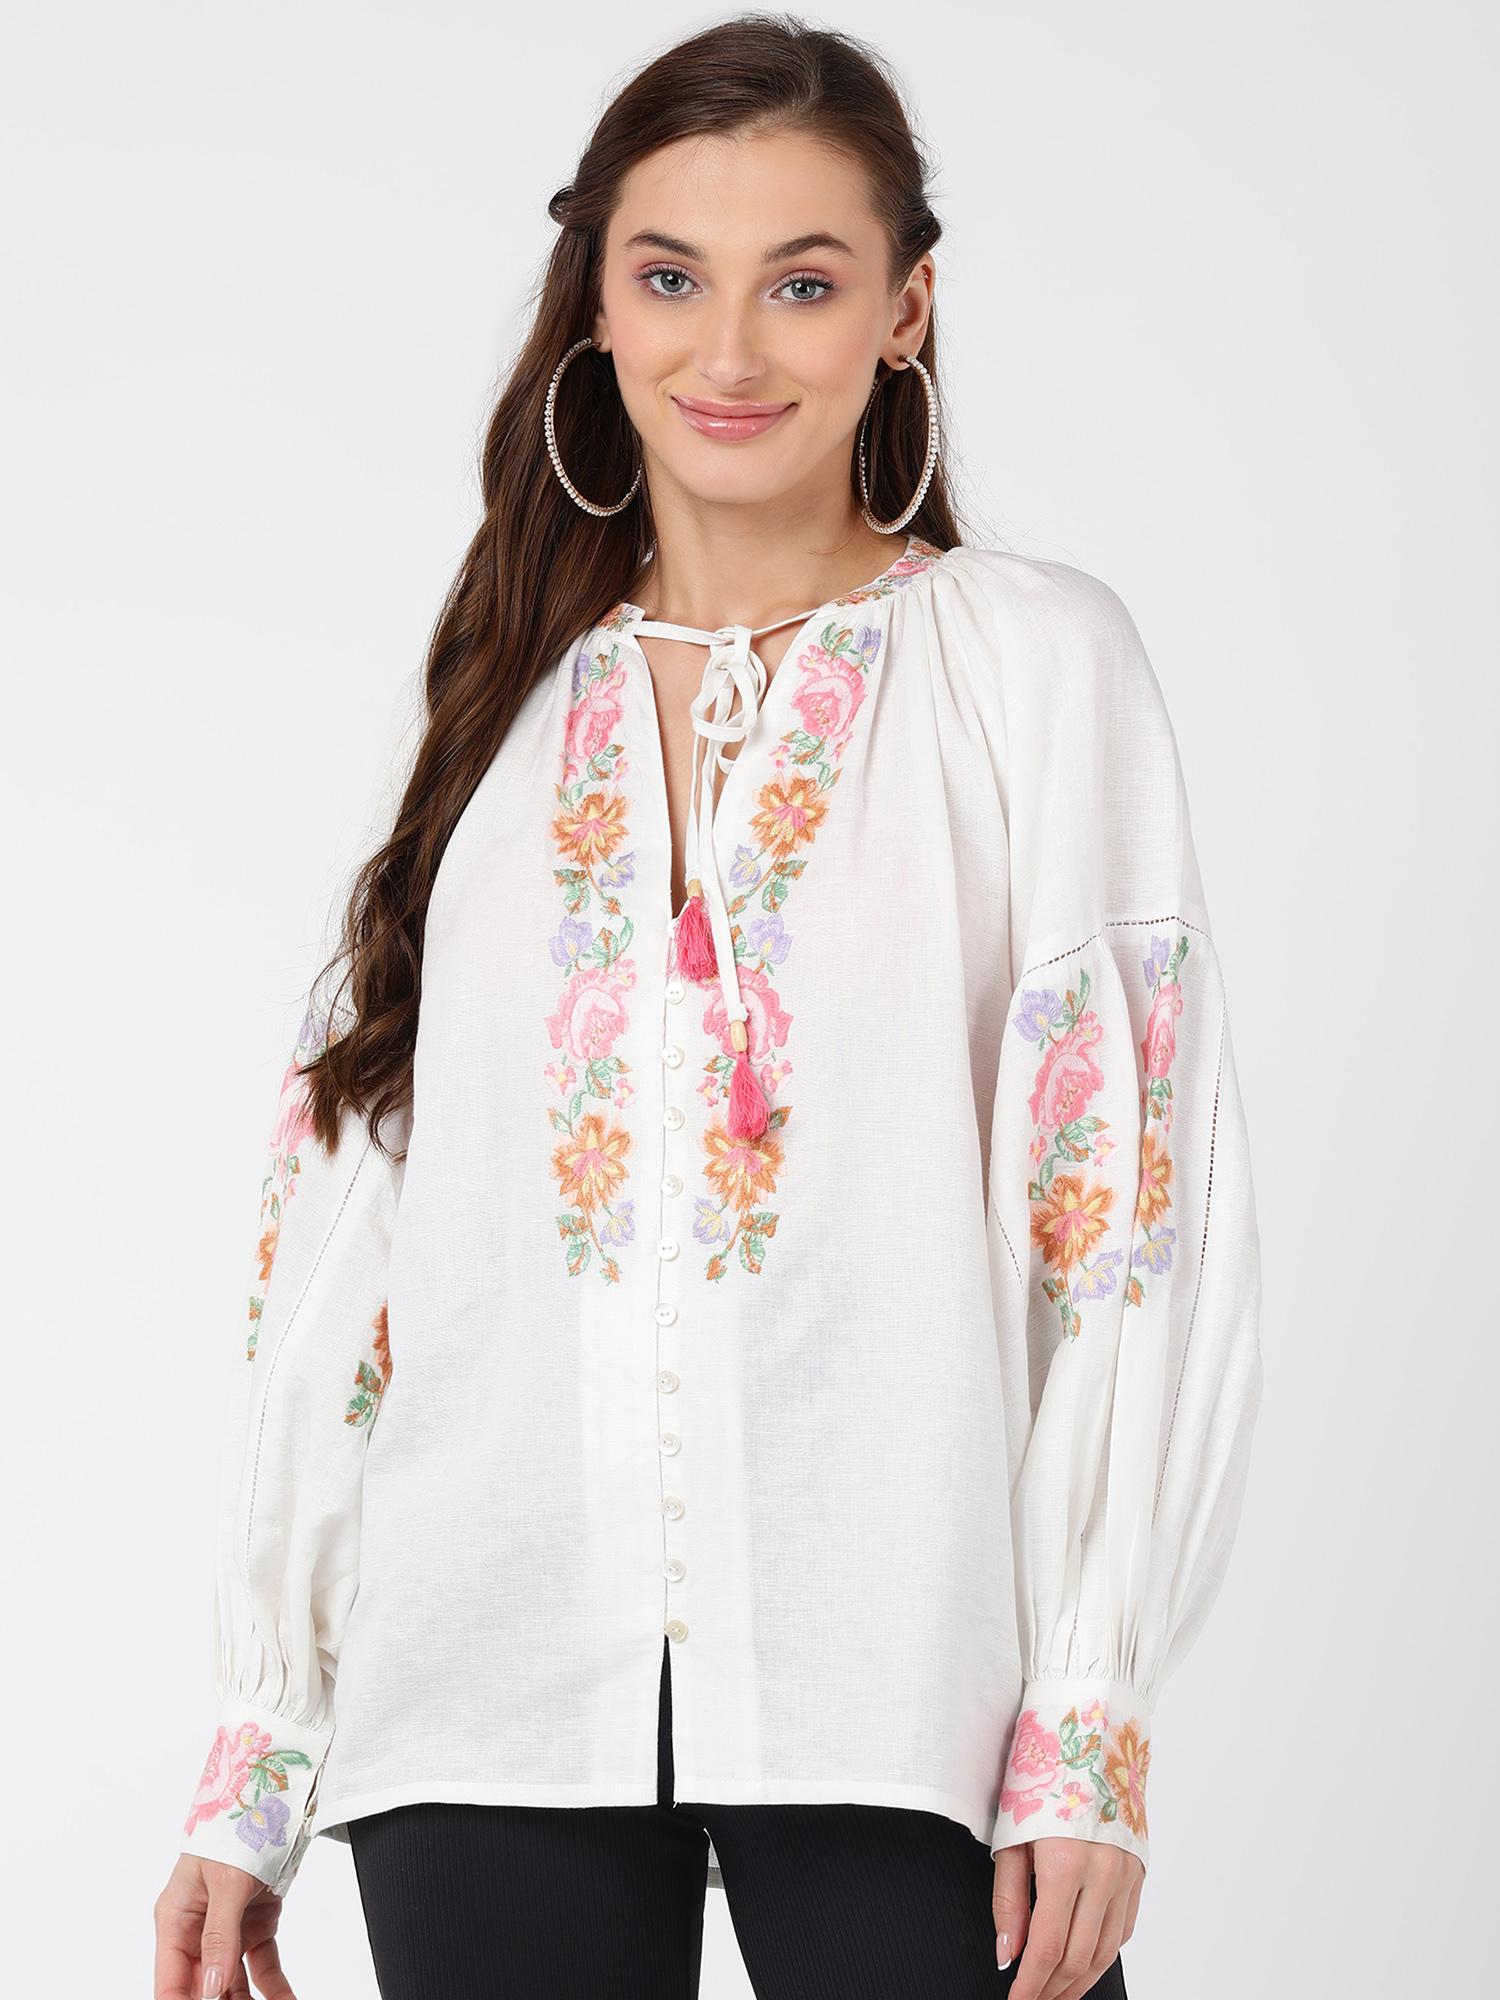 Women's Embrodery Top